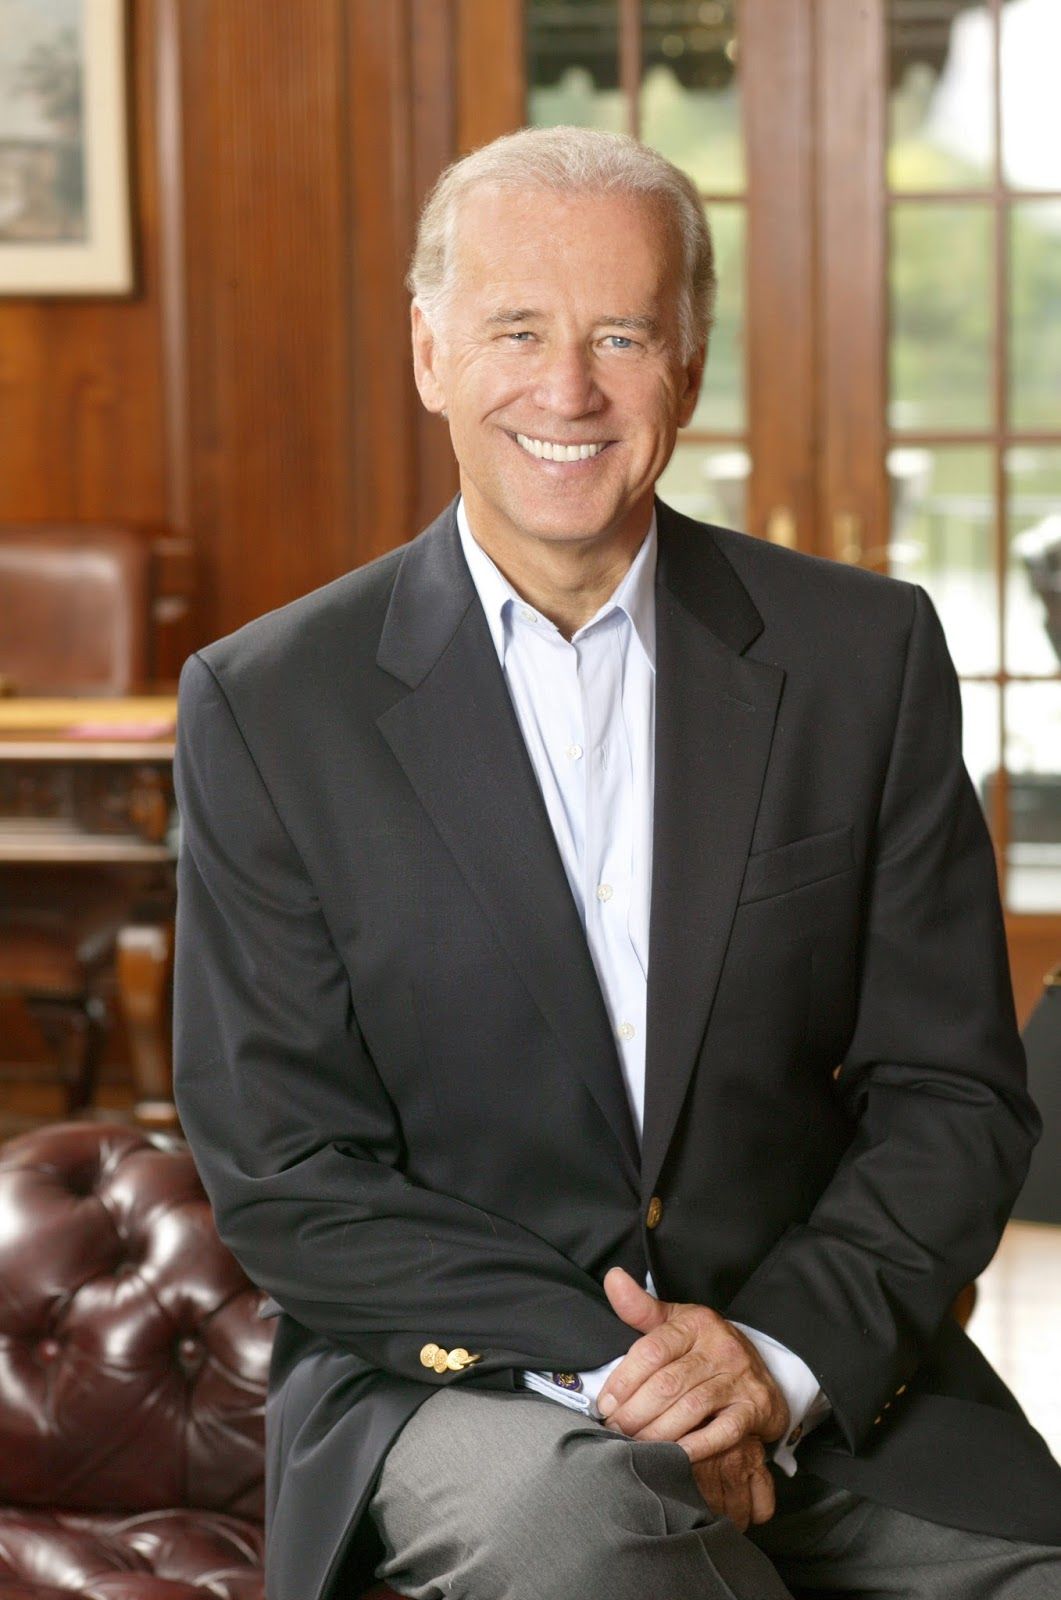 Joe Bidens 2020 Campaign Makes Me Sick with Fear for Our Future  Teen  Vogue